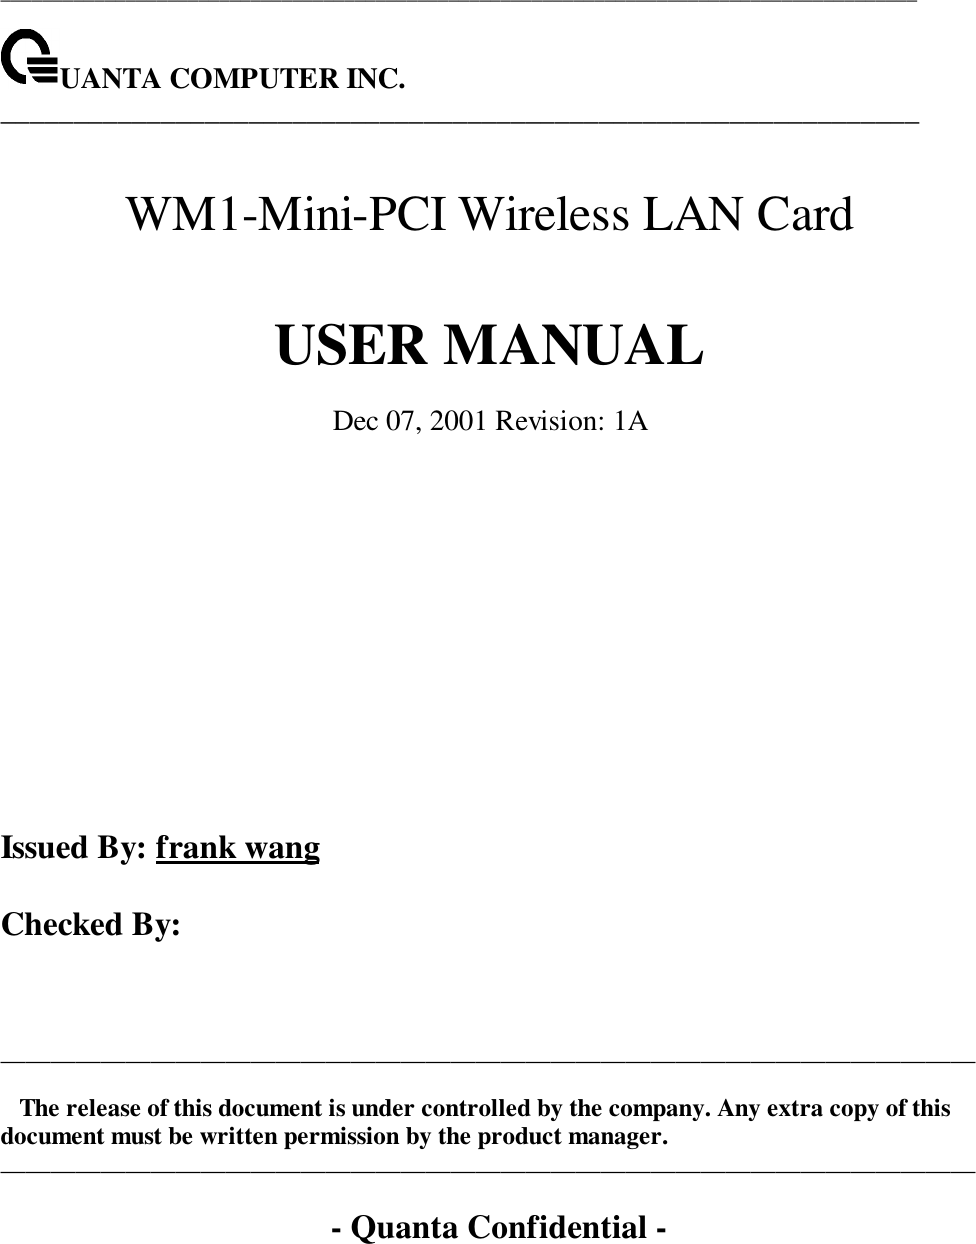 ________________________________________________________________________________________UANTA COMPUTER INC._______________________________________________________________WM1-Mini-PCI Wireless LAN CardUSER MANUALDec 07, 2001 Revision: 1AIssued By: frank wangChecked By:______________________________________________________________________________The release of this document is under controlled by the company. Any extra copy of thisdocument must be written permission by the product manager.______________________________________________________________________________- Quanta Confidential -